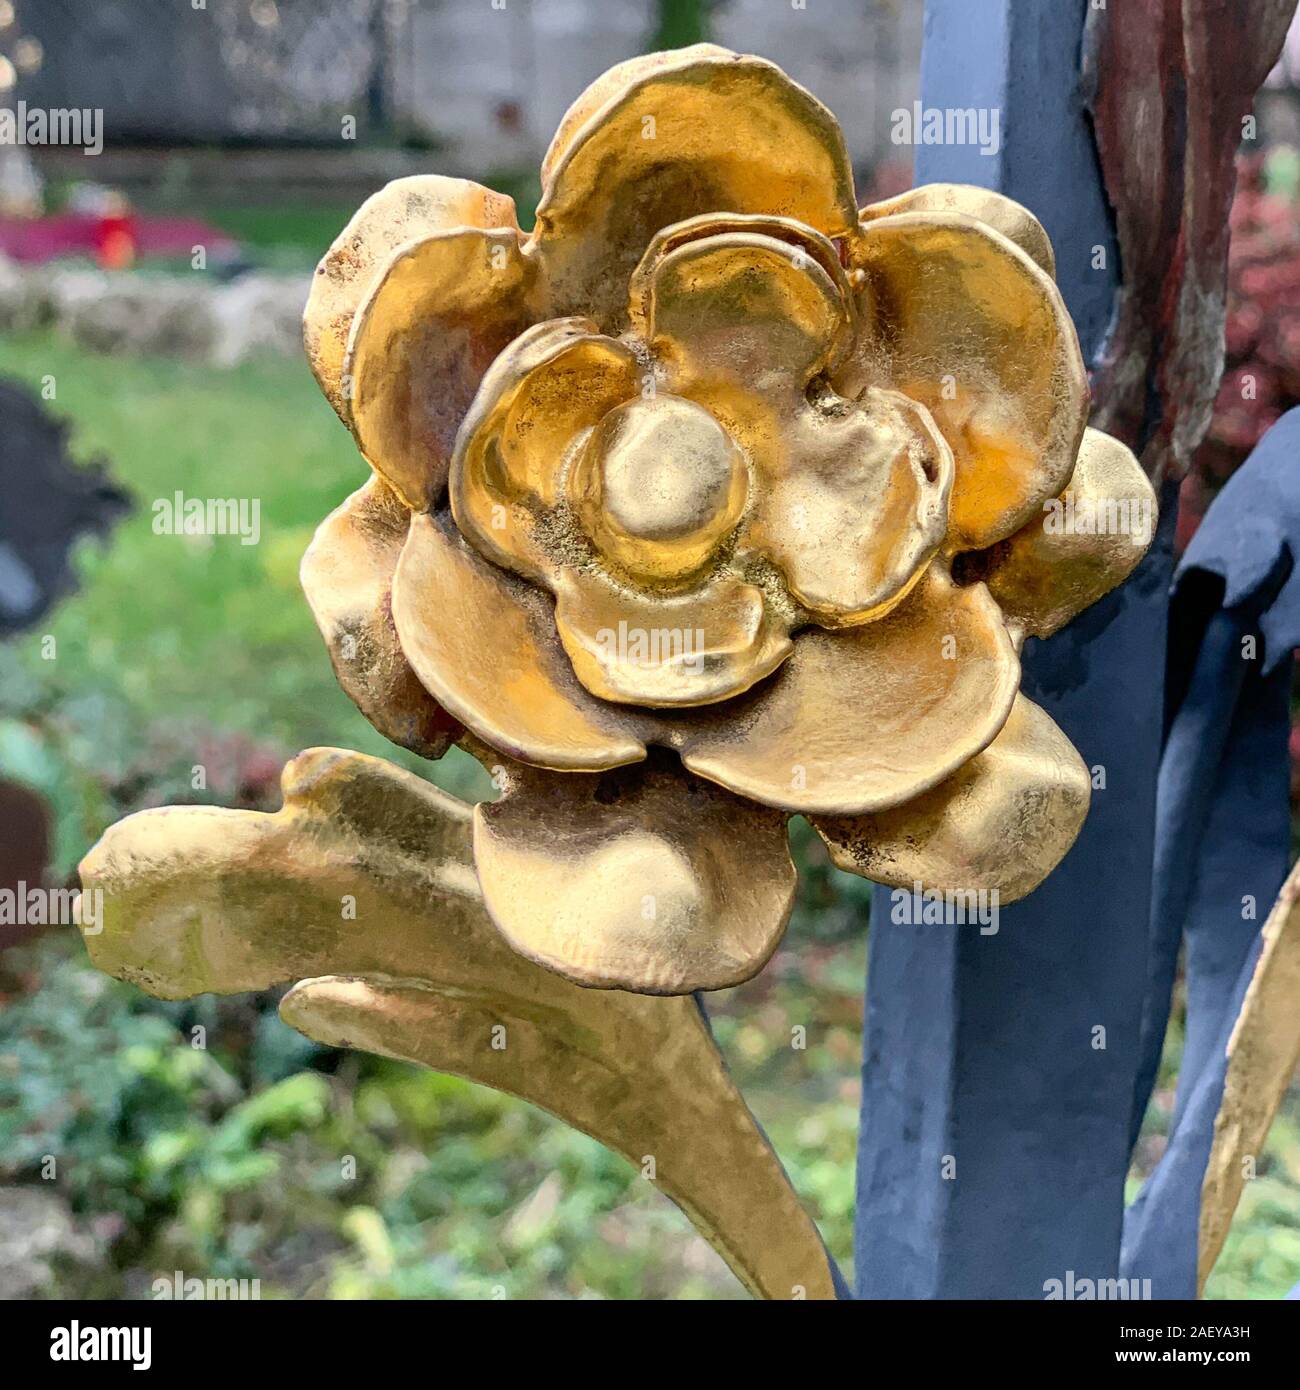 Gilded rose made of metal. Gold plated blossom. Ornament on an iron grate of a grave from the nineteenth century. Handmade floral ornament. Stock Photo